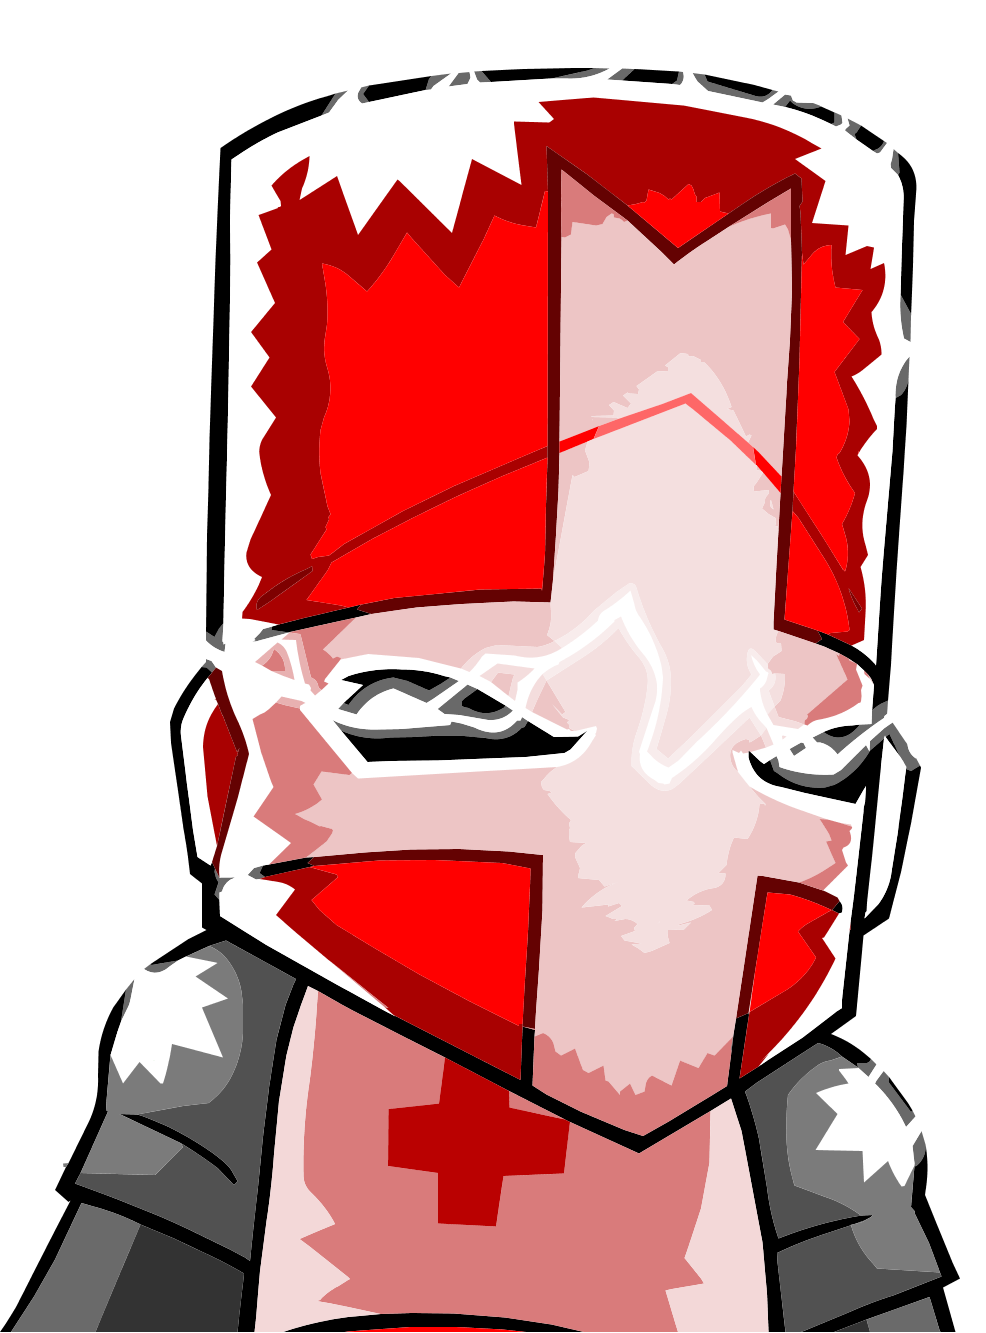 Red Knight is one of the 31 Playable Characters in the game Castle Crashers. 